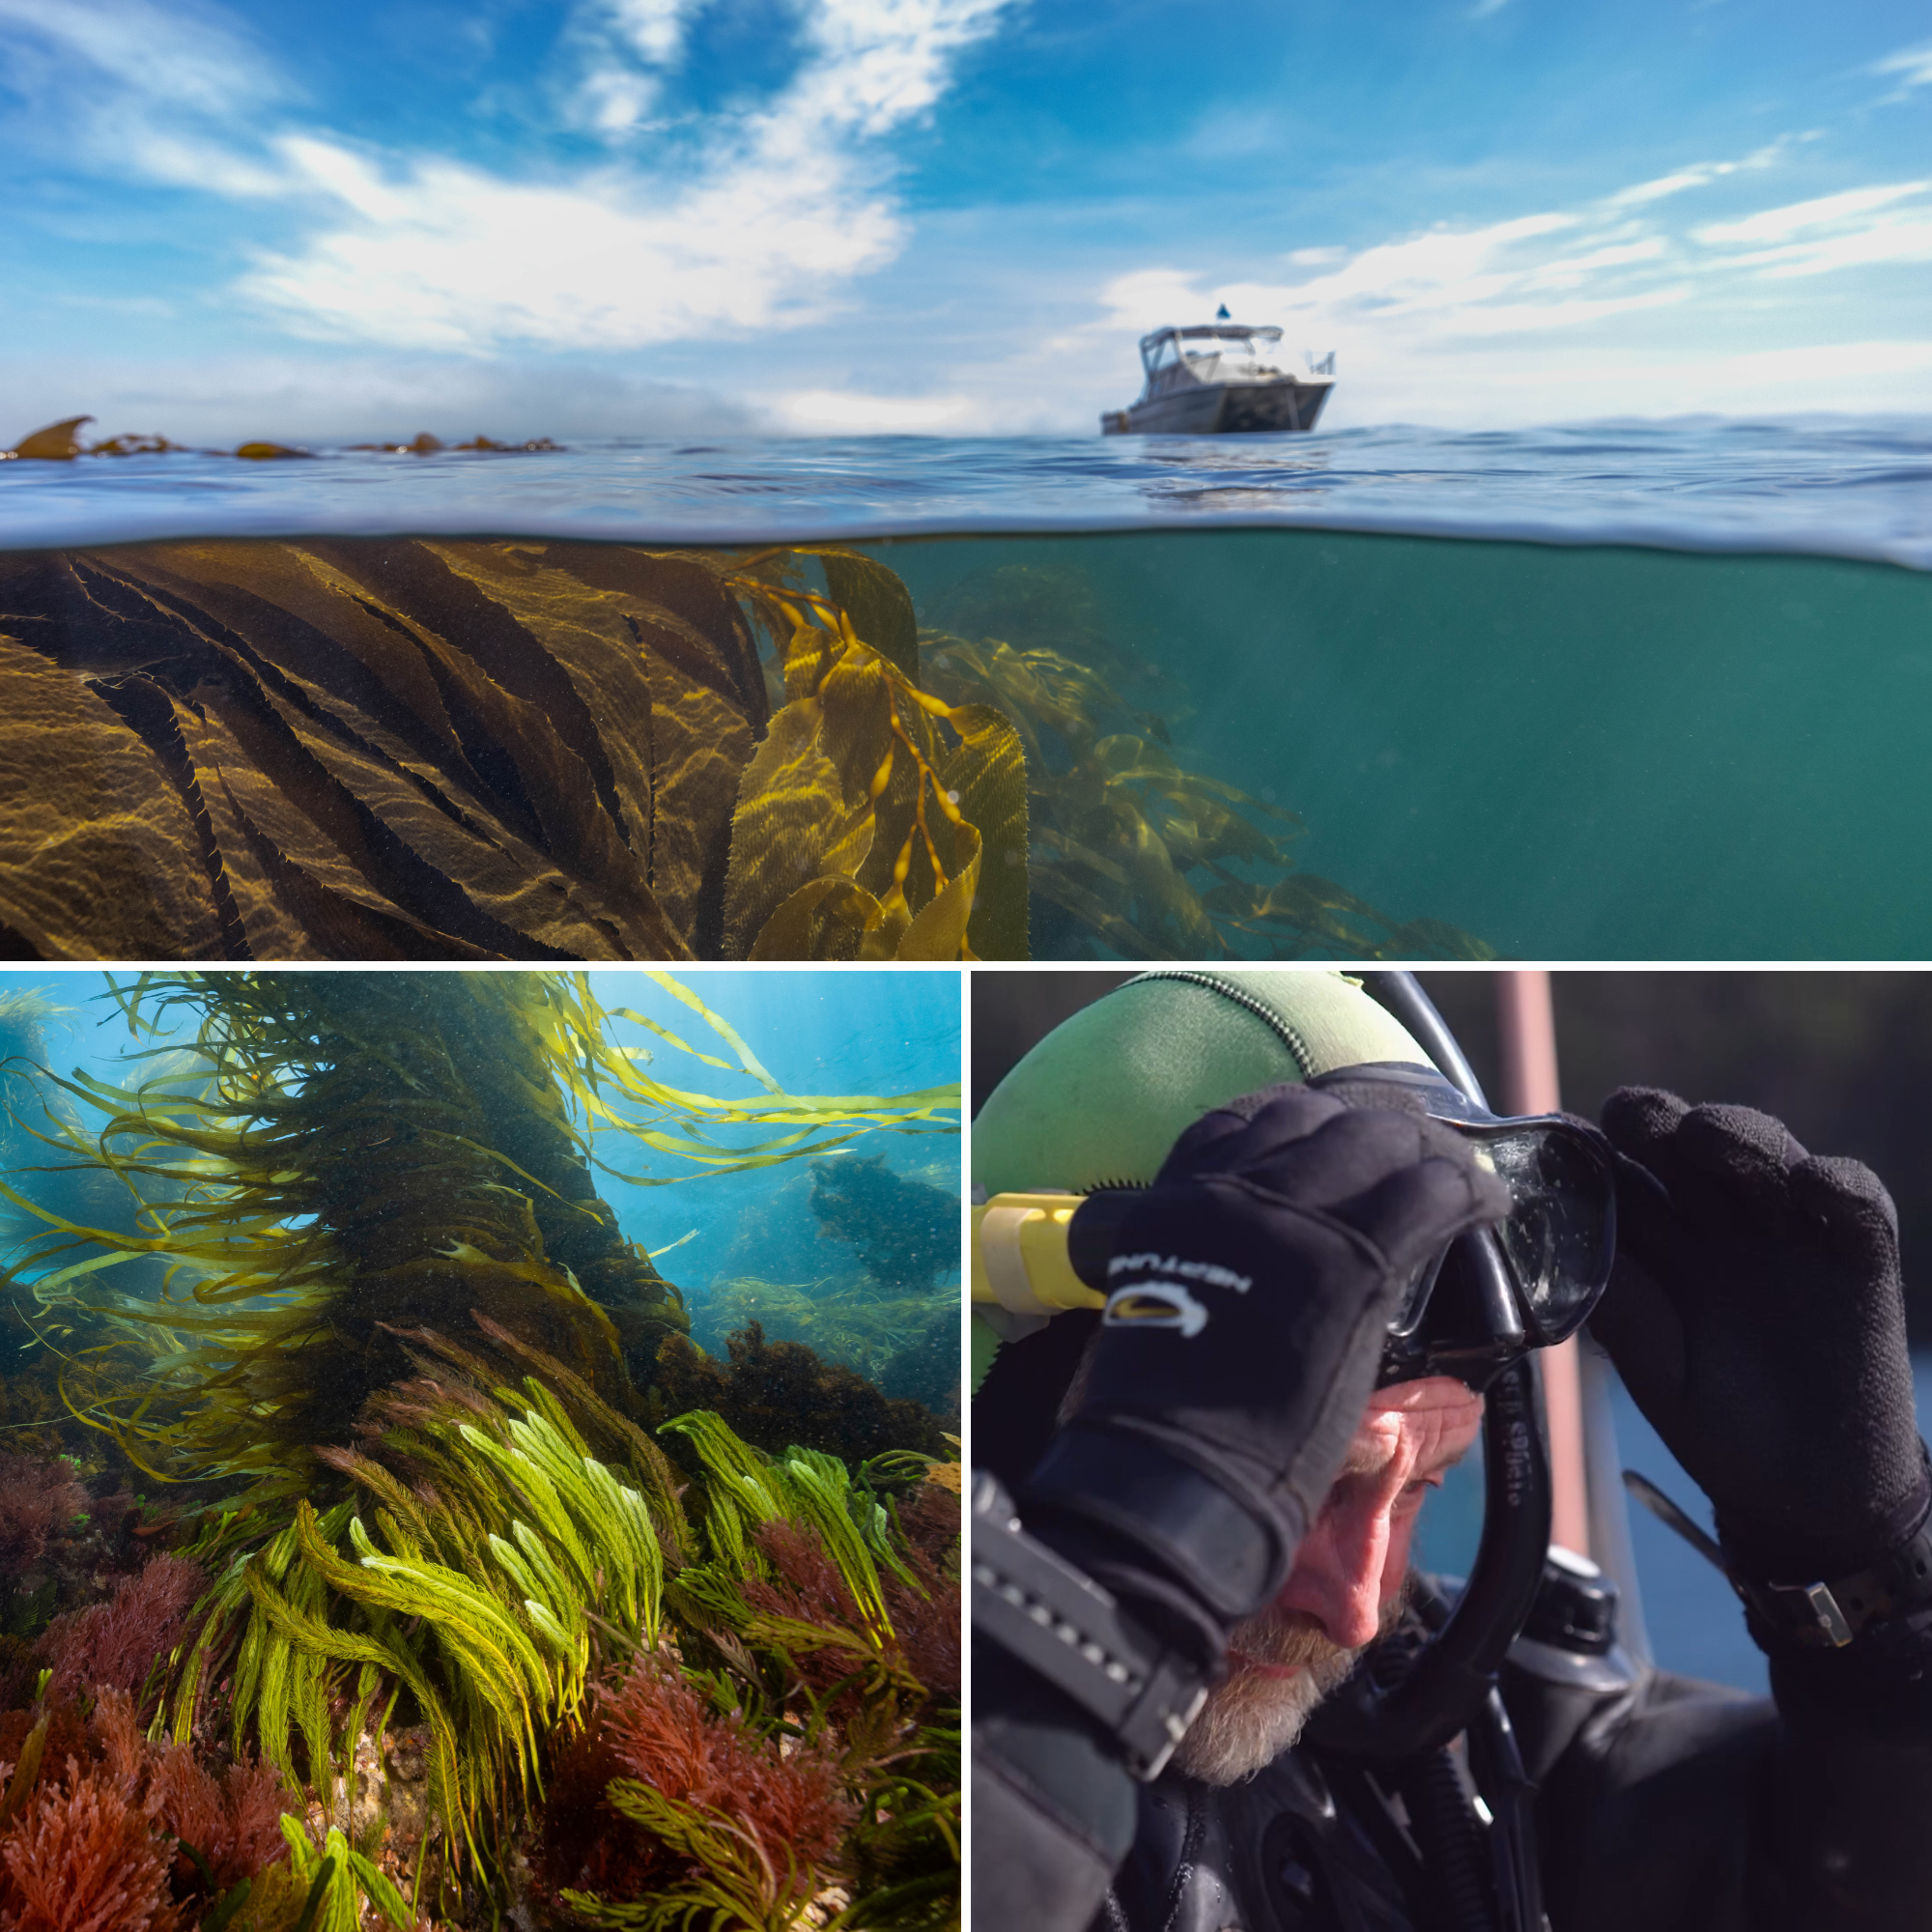 Underwater photos of seafeed gentle floating with the current and scuba diver putting on mask